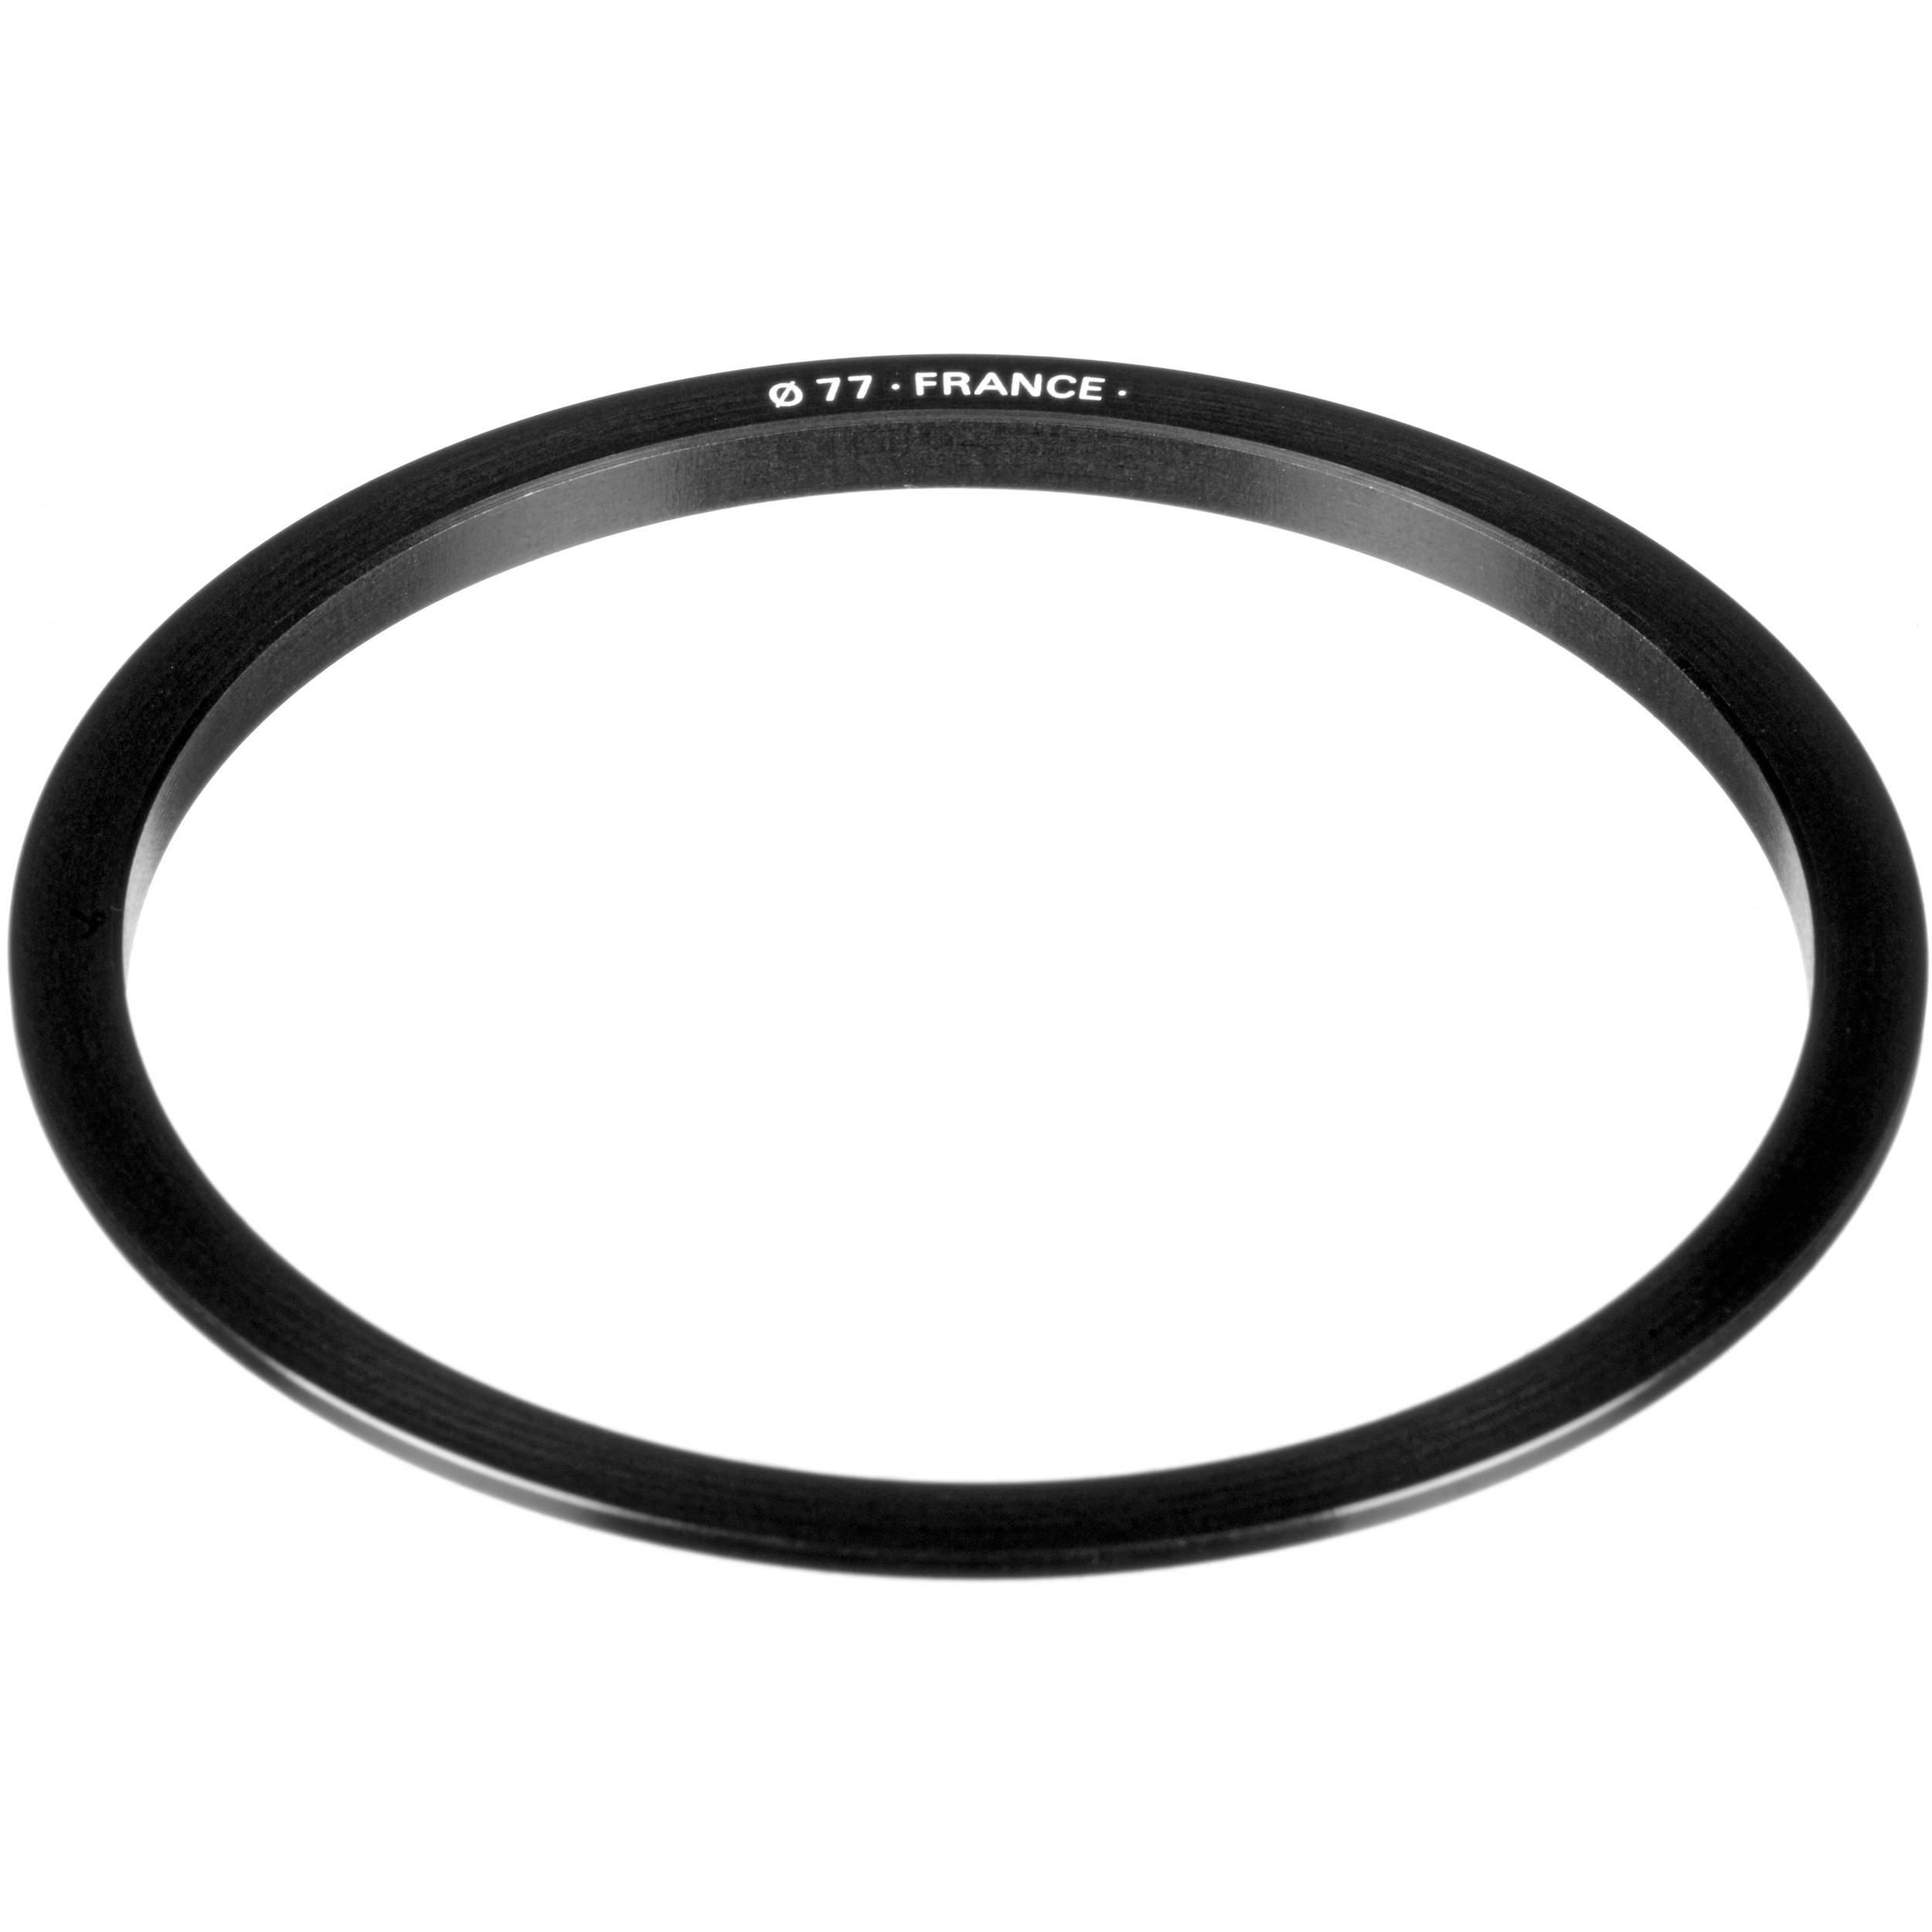 Cokin P Series Filter Holder Adapter Ring 77mm Cp477 B H Photo Several modern adapters have an element known as a telecom pressor or a focal reducer, which is built to reduce the focal length and increase the lens's speed. cokin p series filter holder adapter ring 77mm